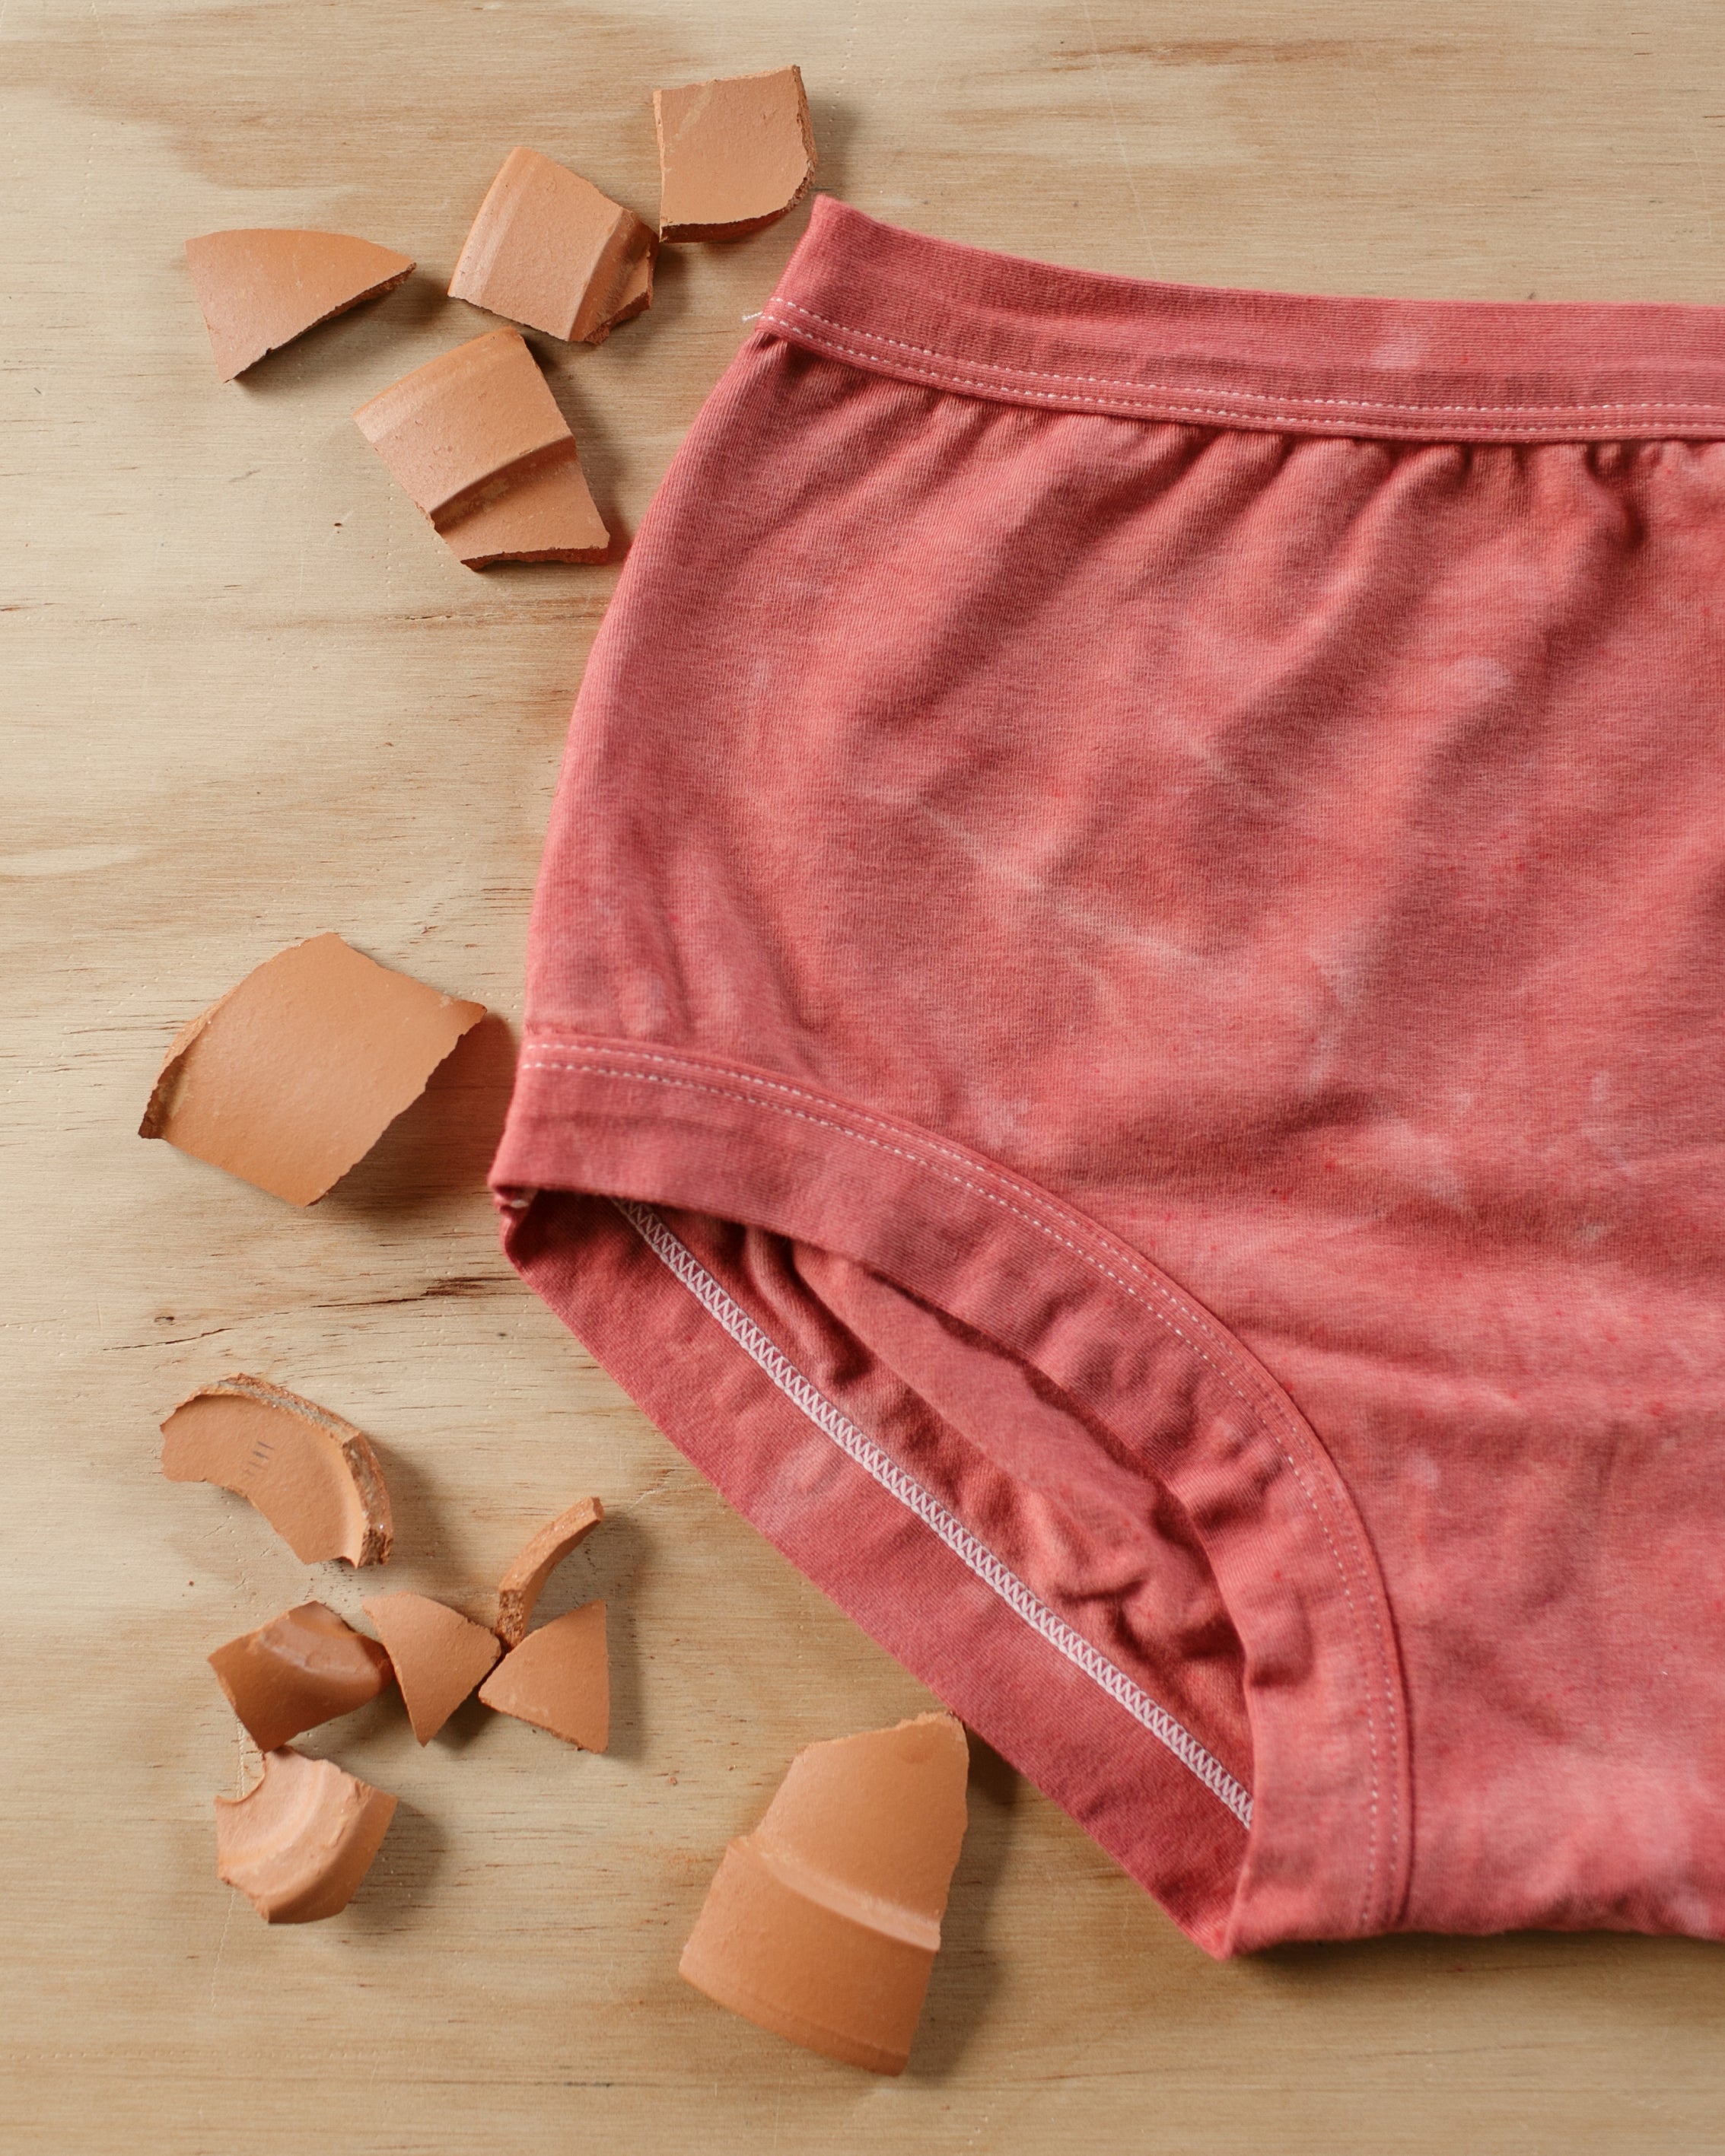 Flat lay of Thunderpants Organic Cotton Original style underwear in hand dye Terracotta color with broken terracotta around.